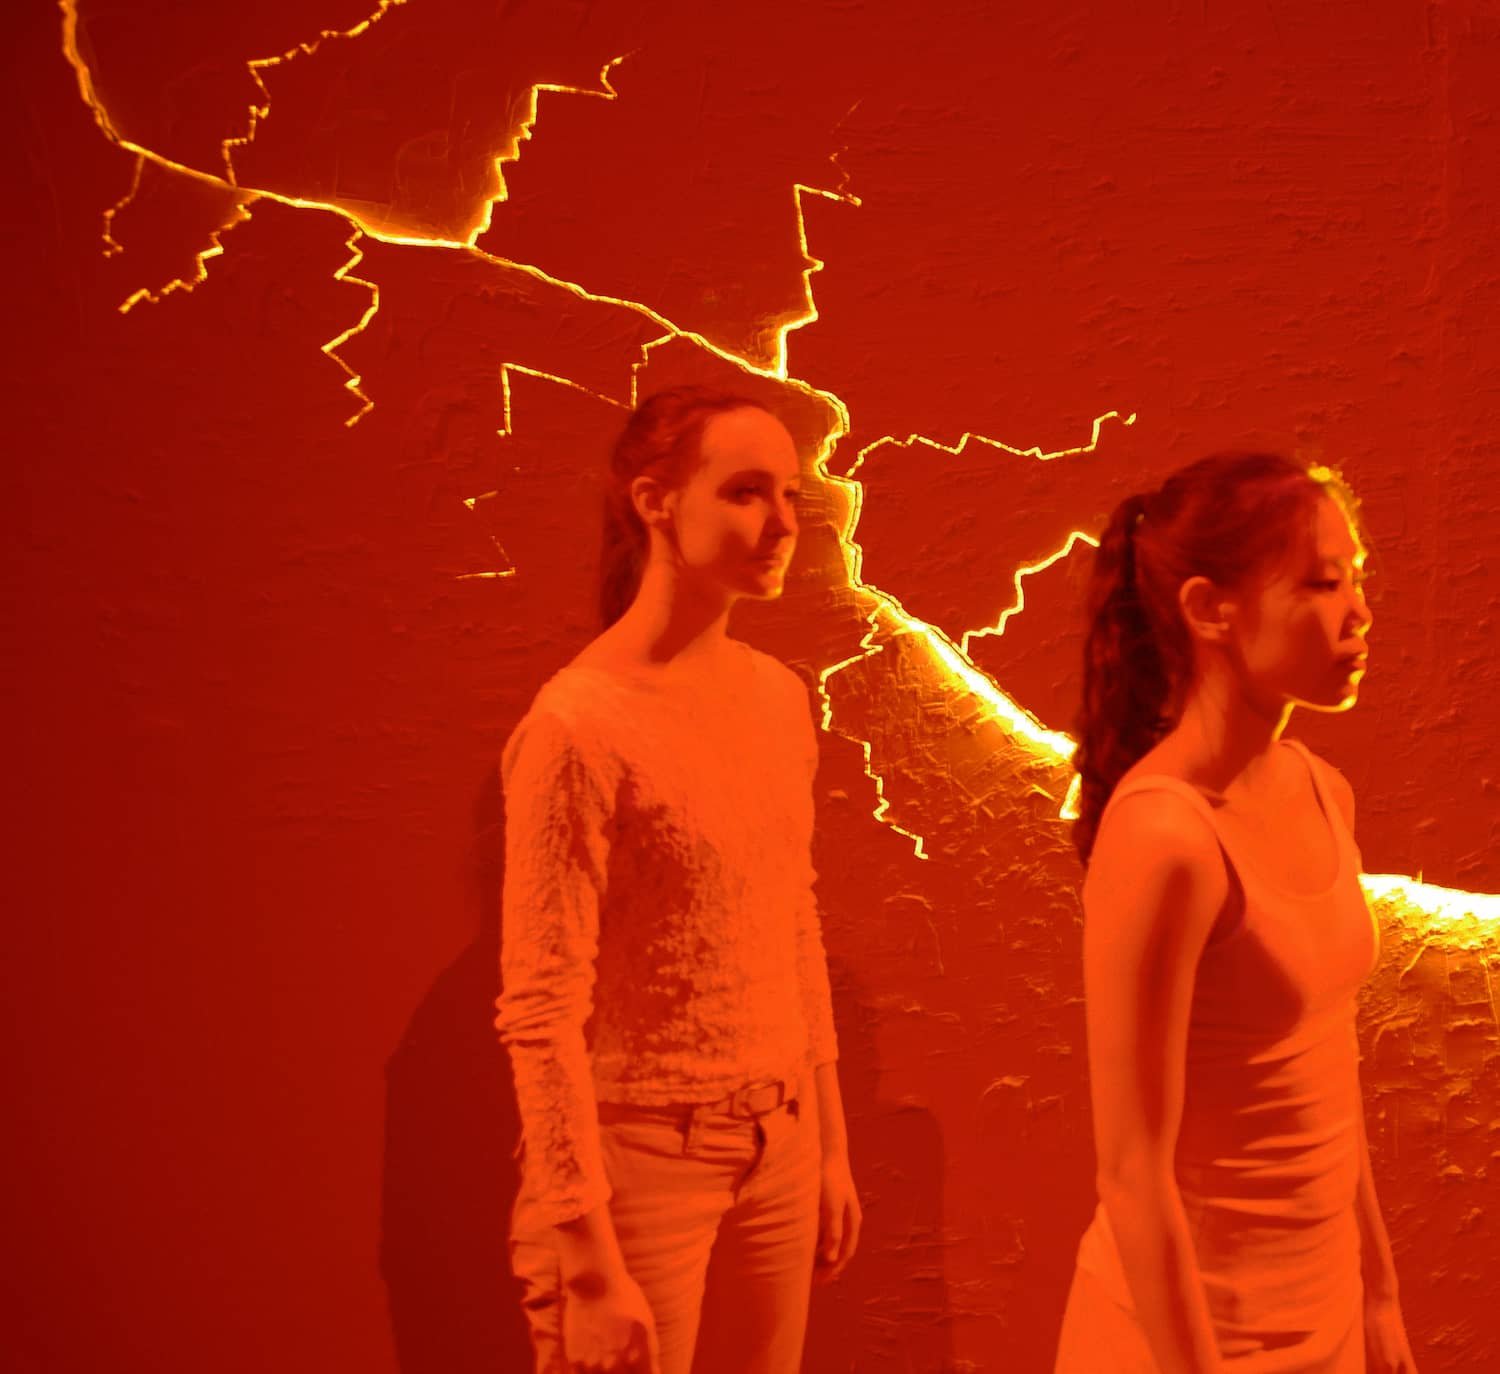 Two performers standing in front the glow coming from the cracked wall.